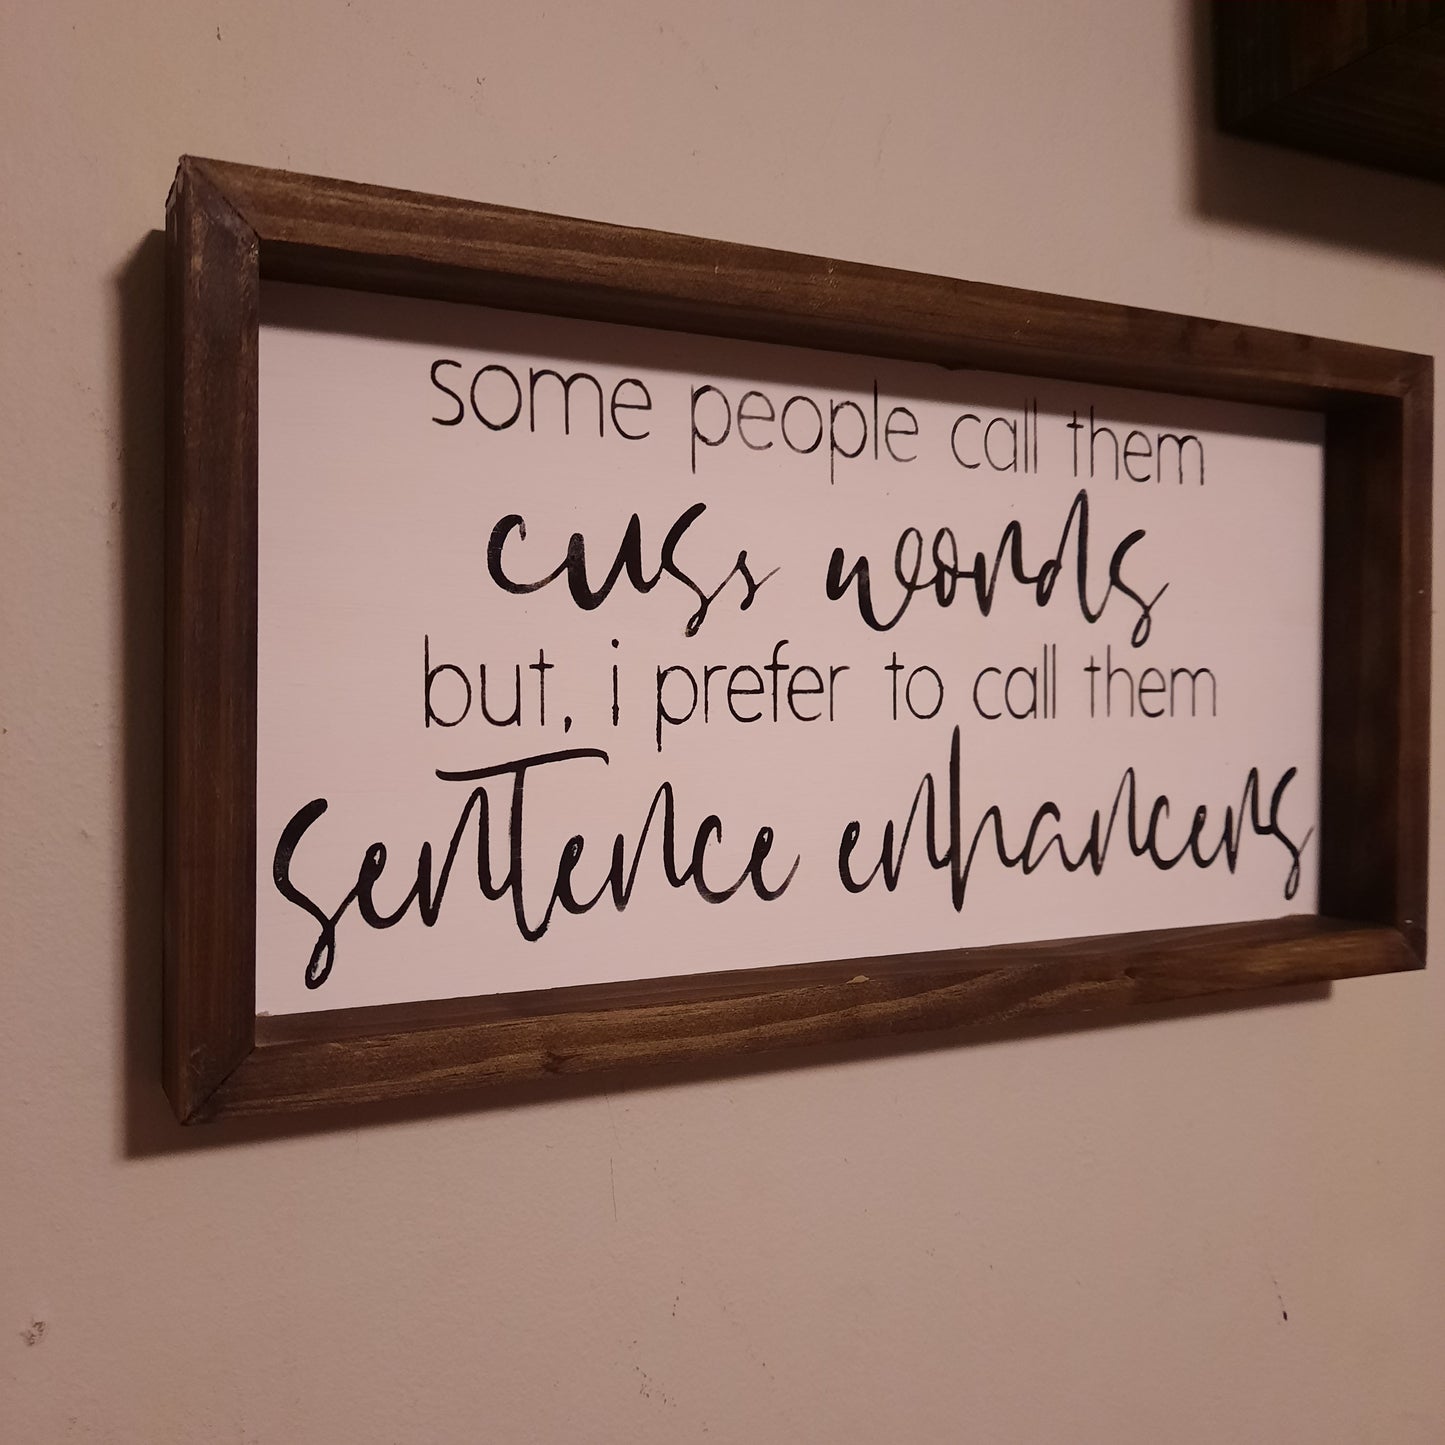 Some people call them cuss words, but i prefer to call them sentence enhancers Sign